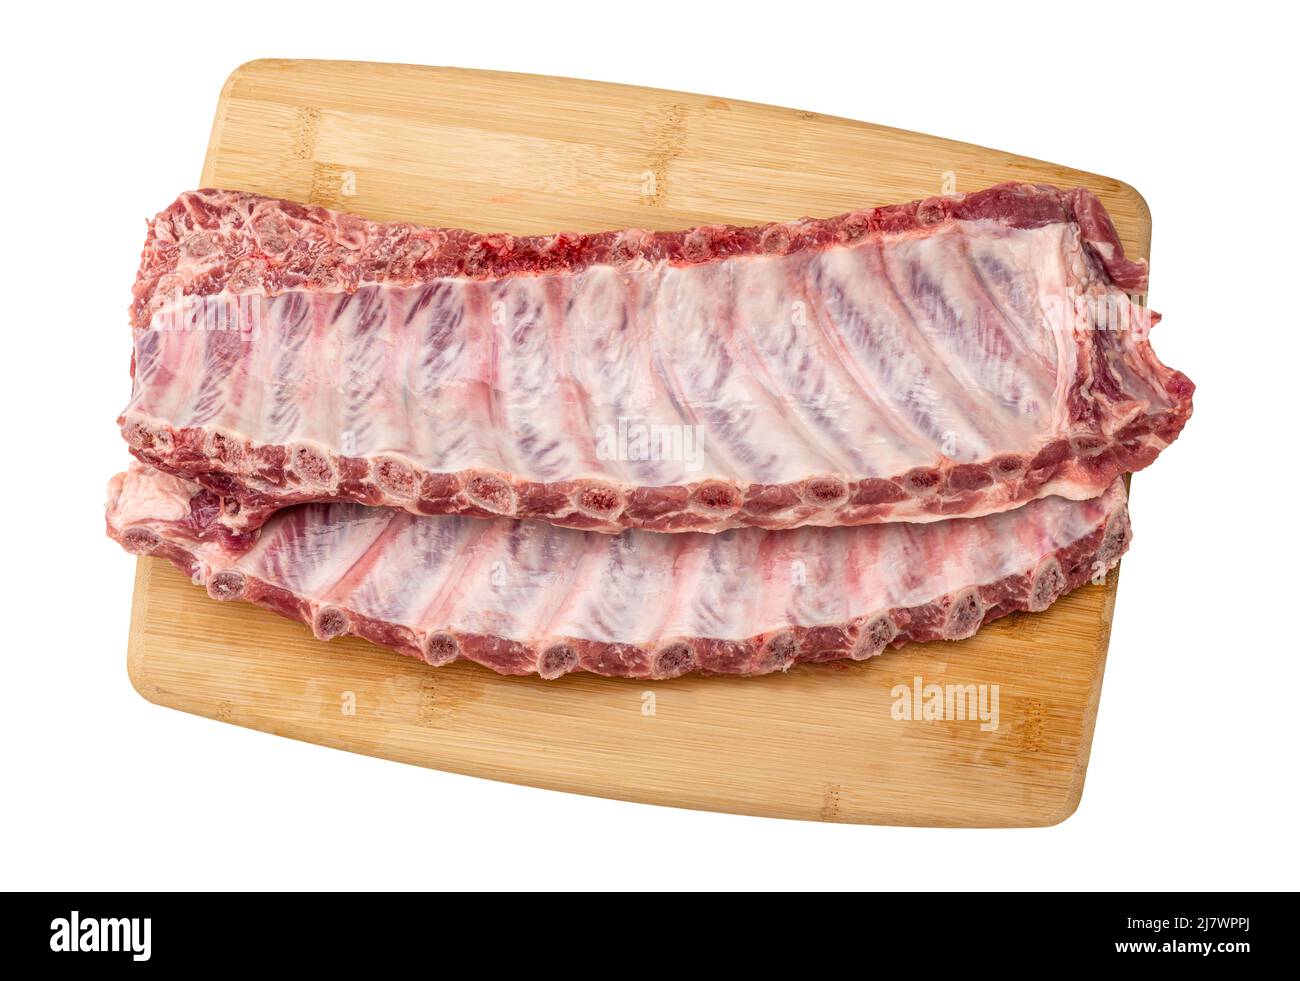 Raw pork spare loin ribs St Louis cut offered. closeup top view on wooden board. Racks of fresh raw pork meat ribs isolated on white background Stock Photo